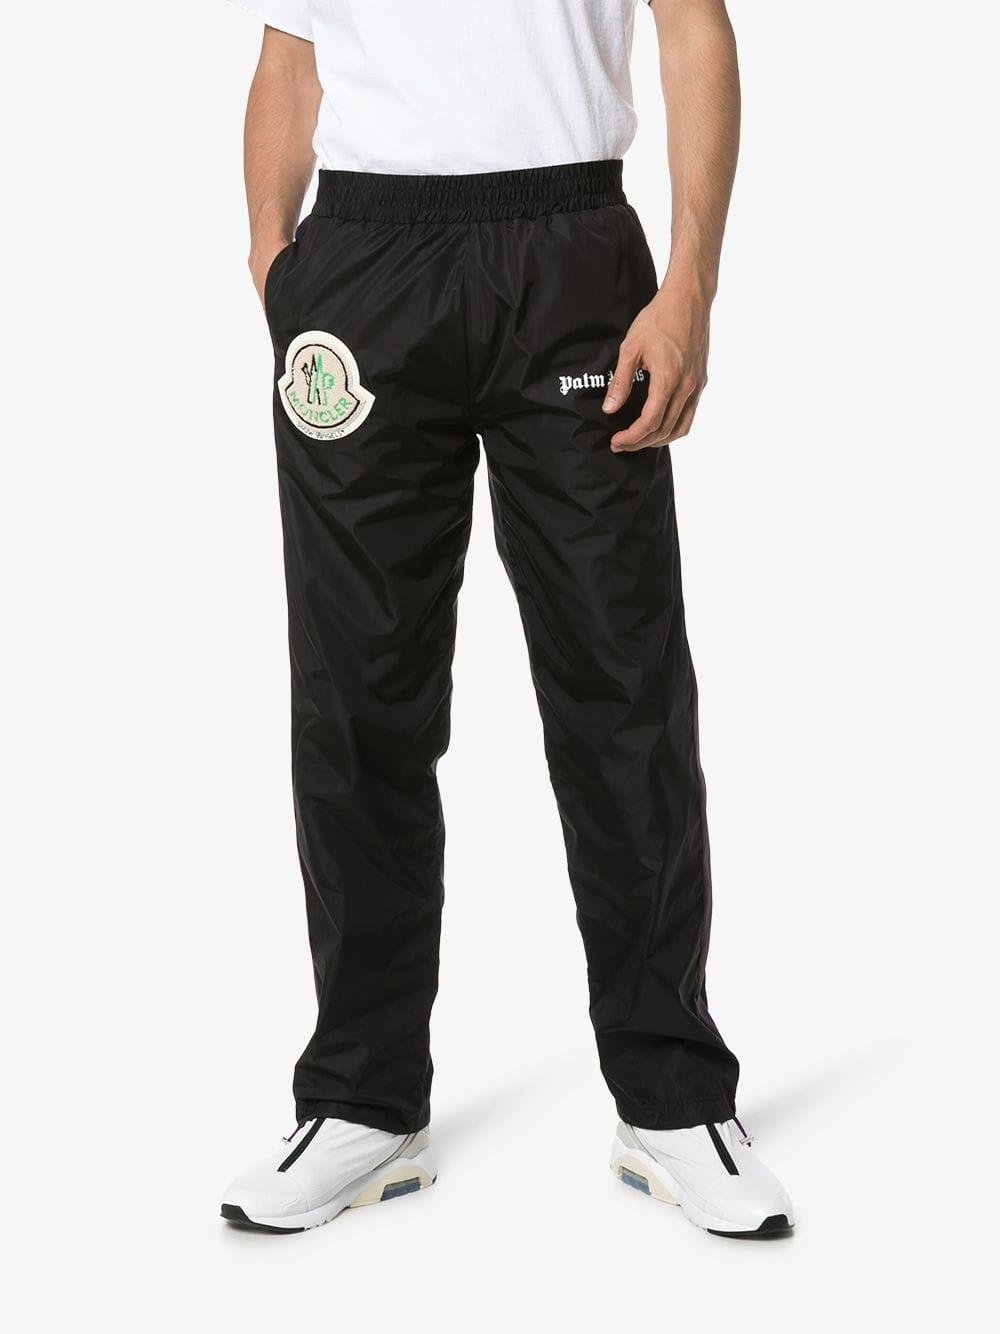 Moncler Genius X Palm Angels Track Pants in Black for Men | Lyst